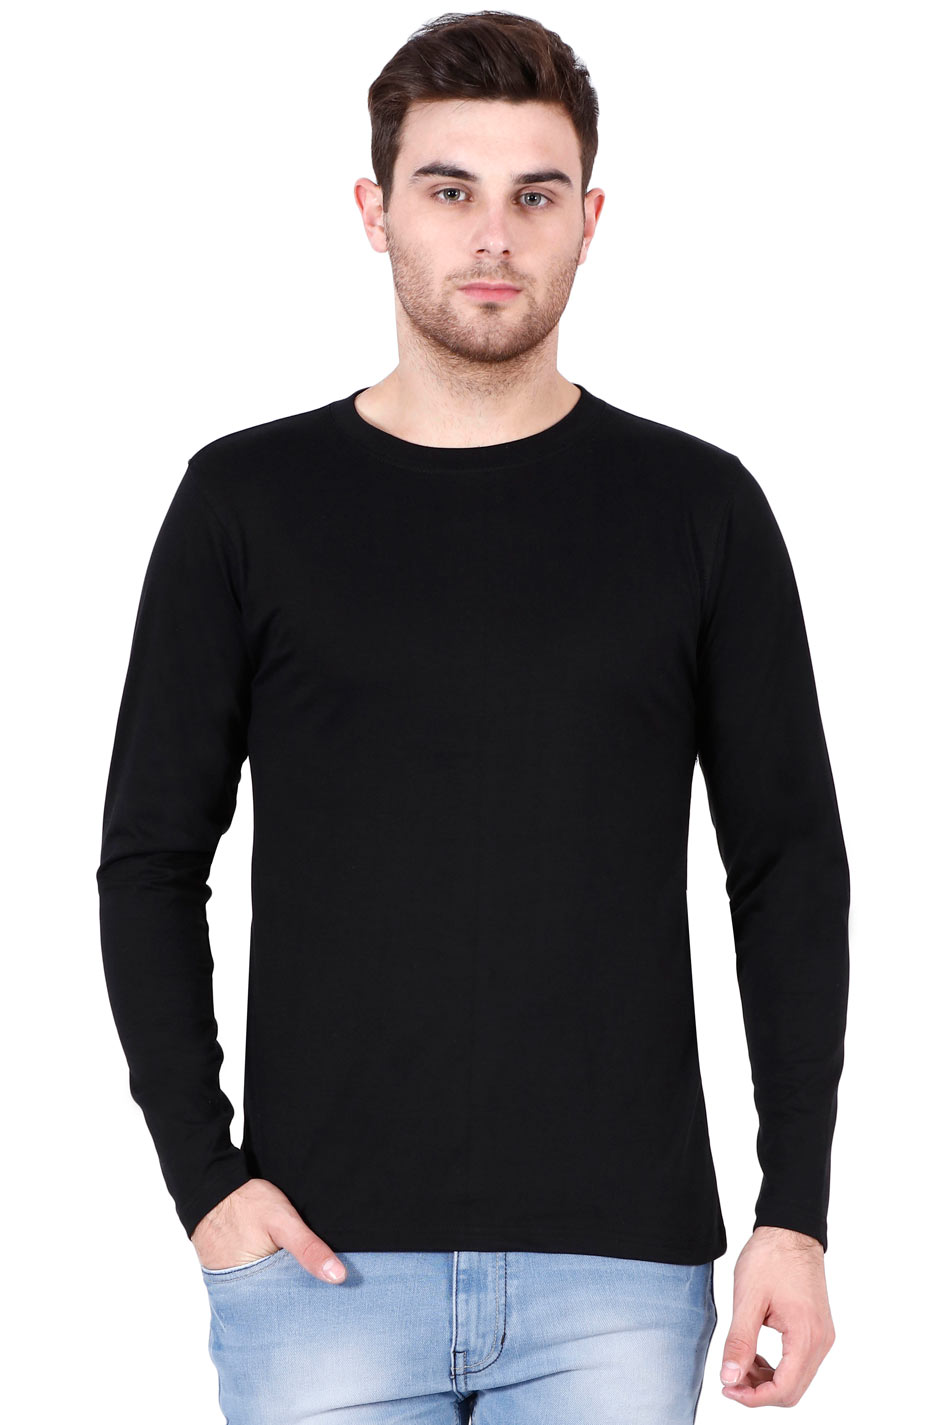 Black cotton t-shirt in long sleeves for men. Shop now at Alloons